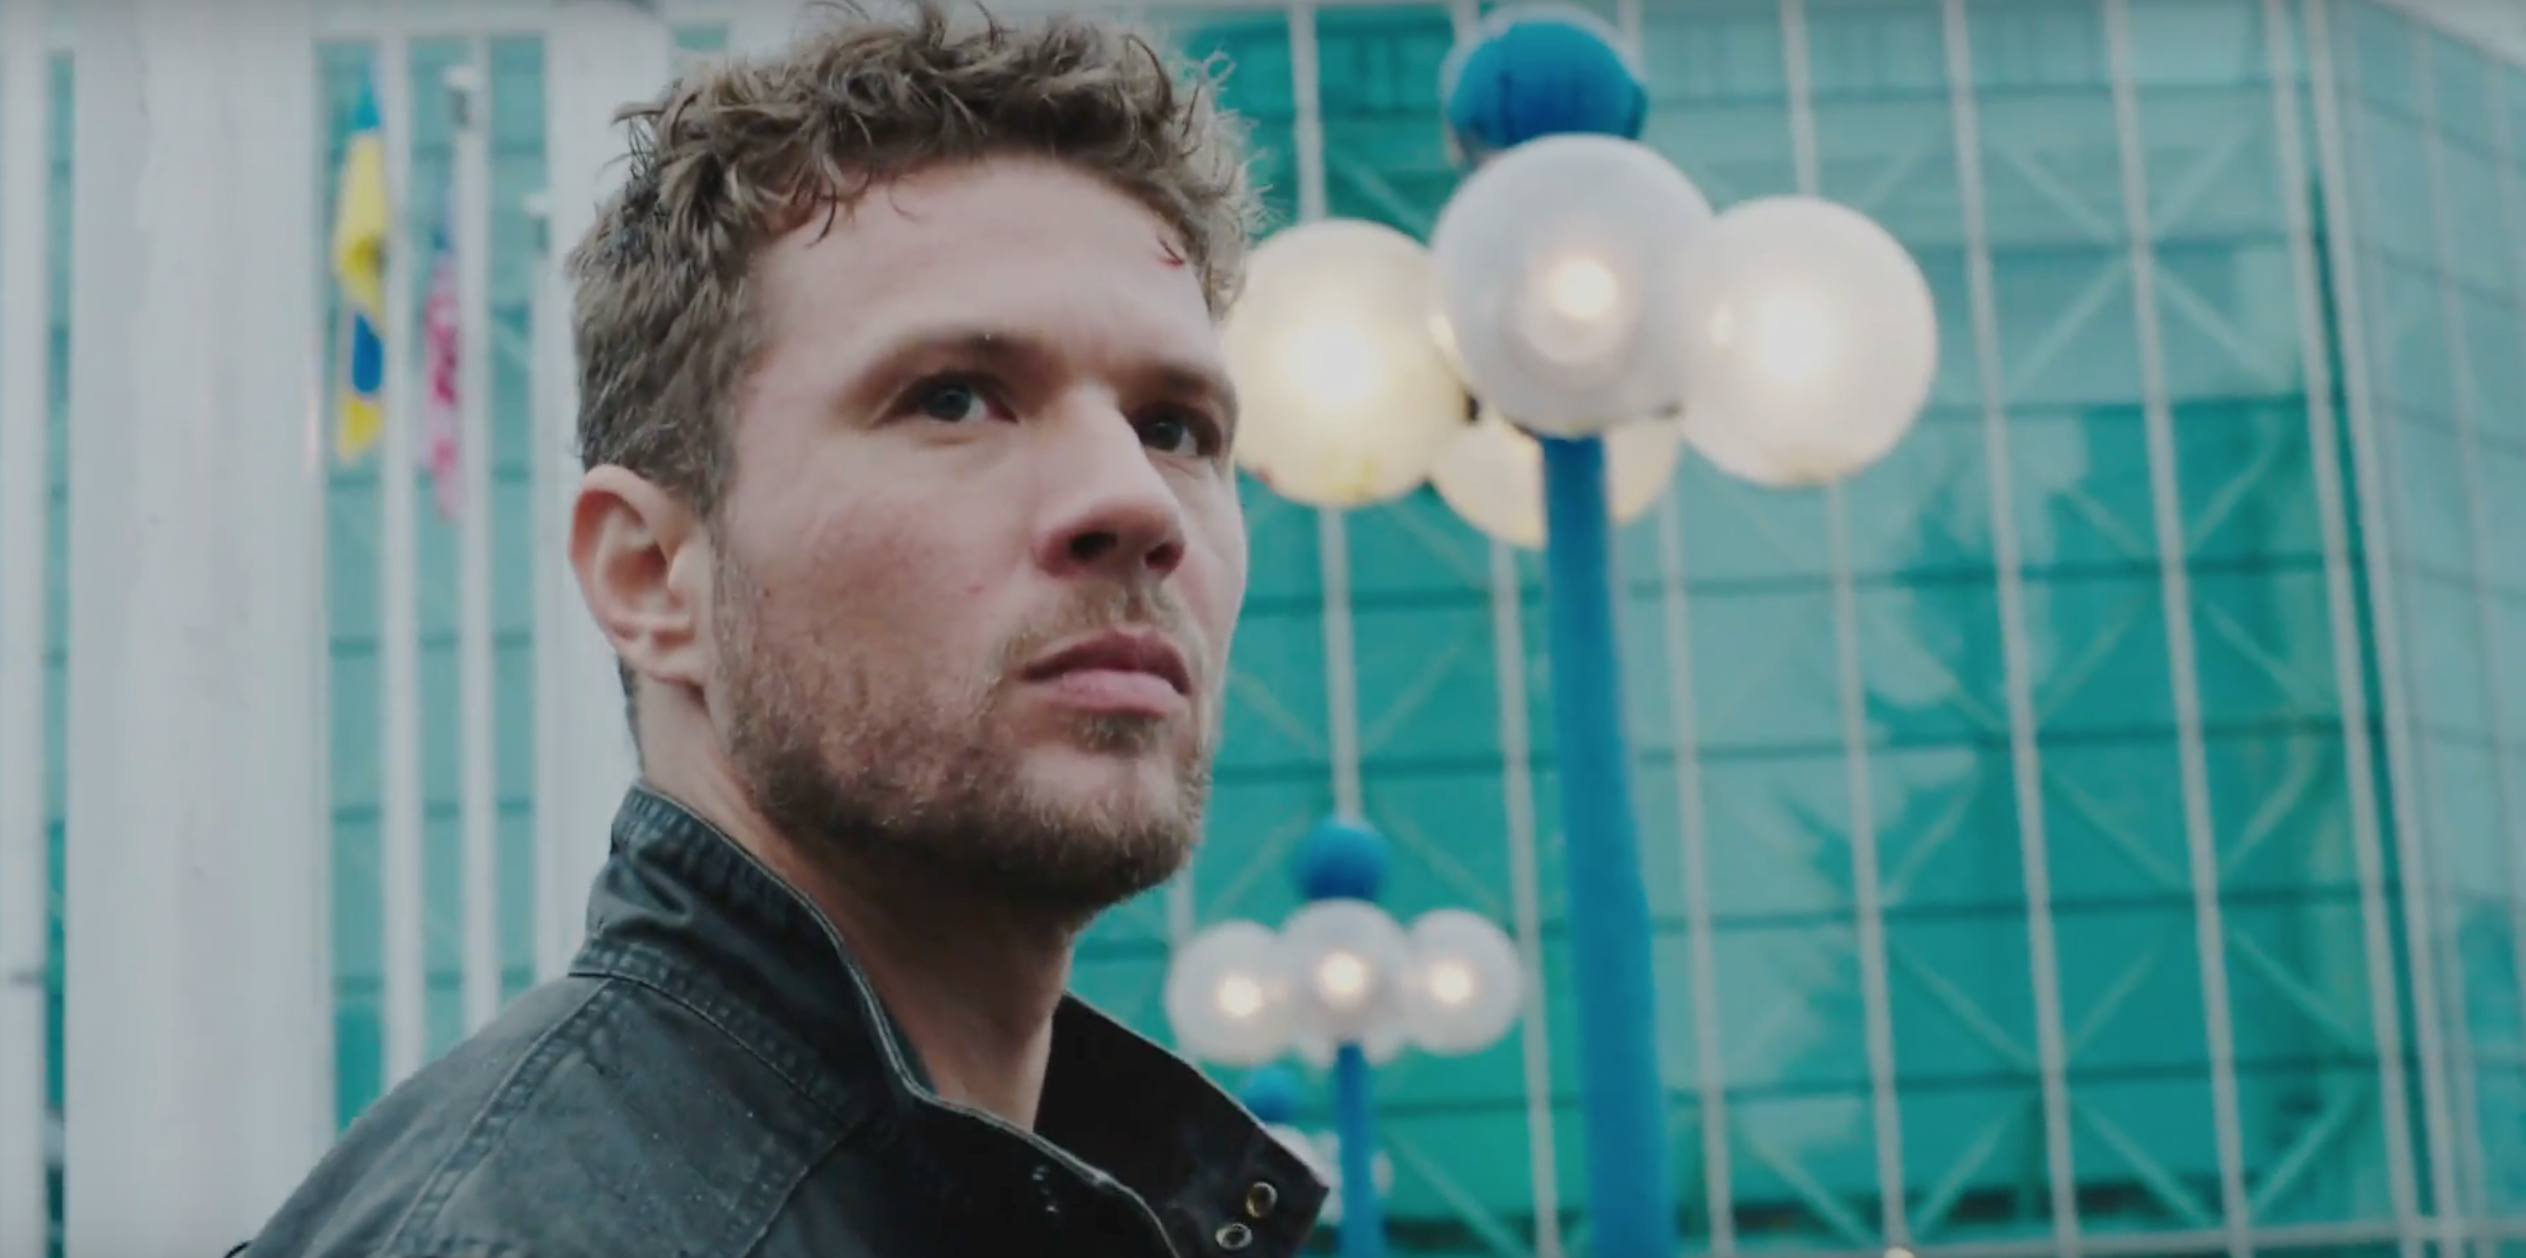 Ryan Phillippe's sniper TV series Shooter is delayed again